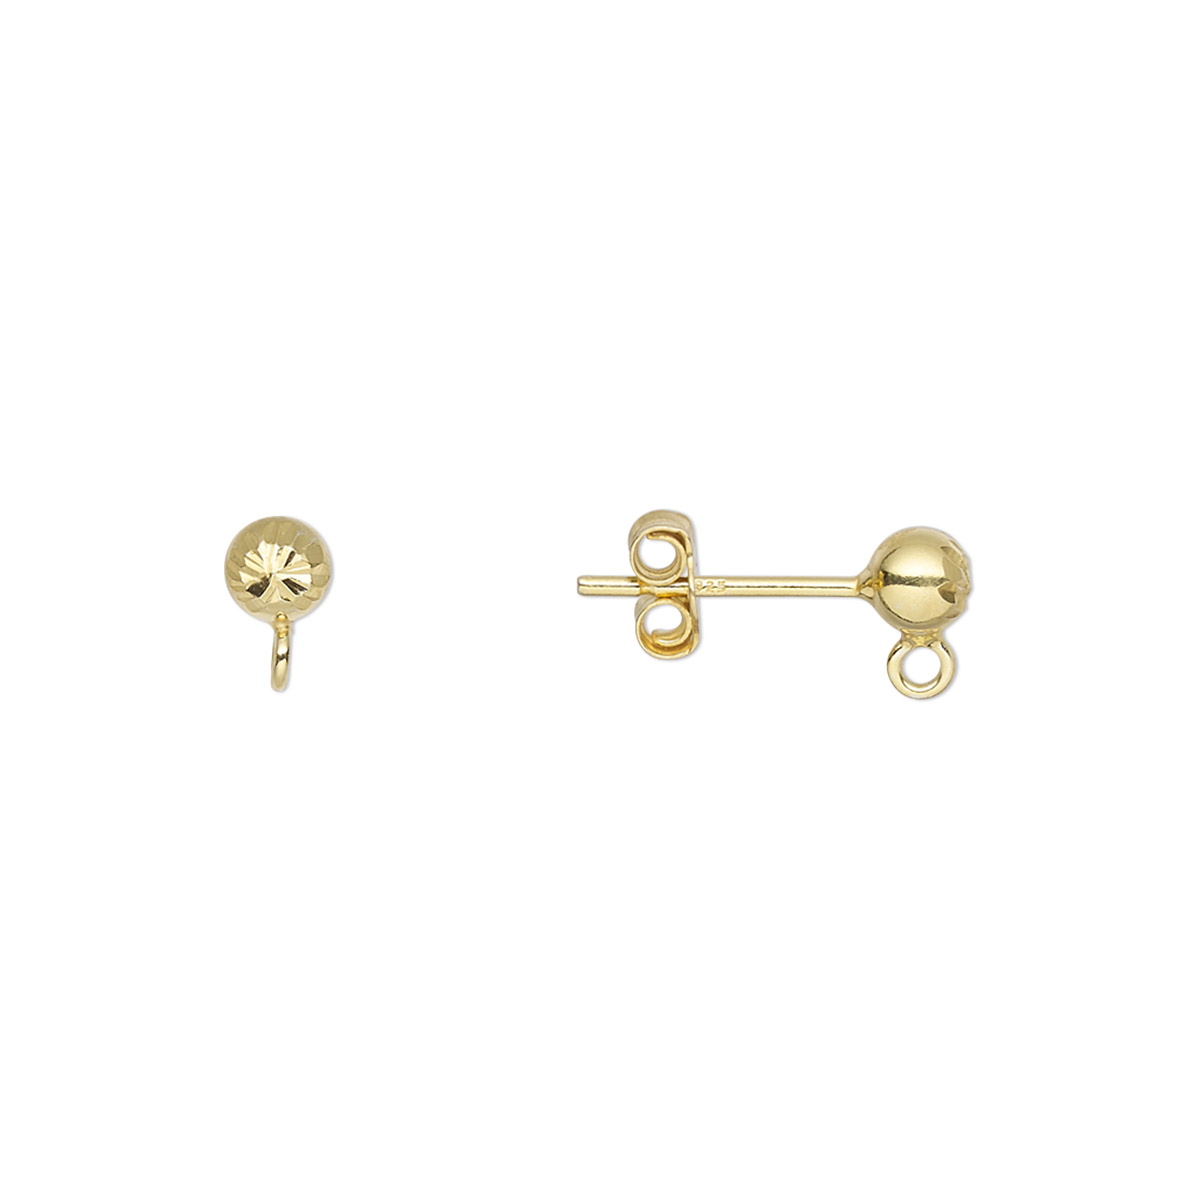 Earstud, gold-finished sterling silver, 4mm diamond-cut ball with loop ...